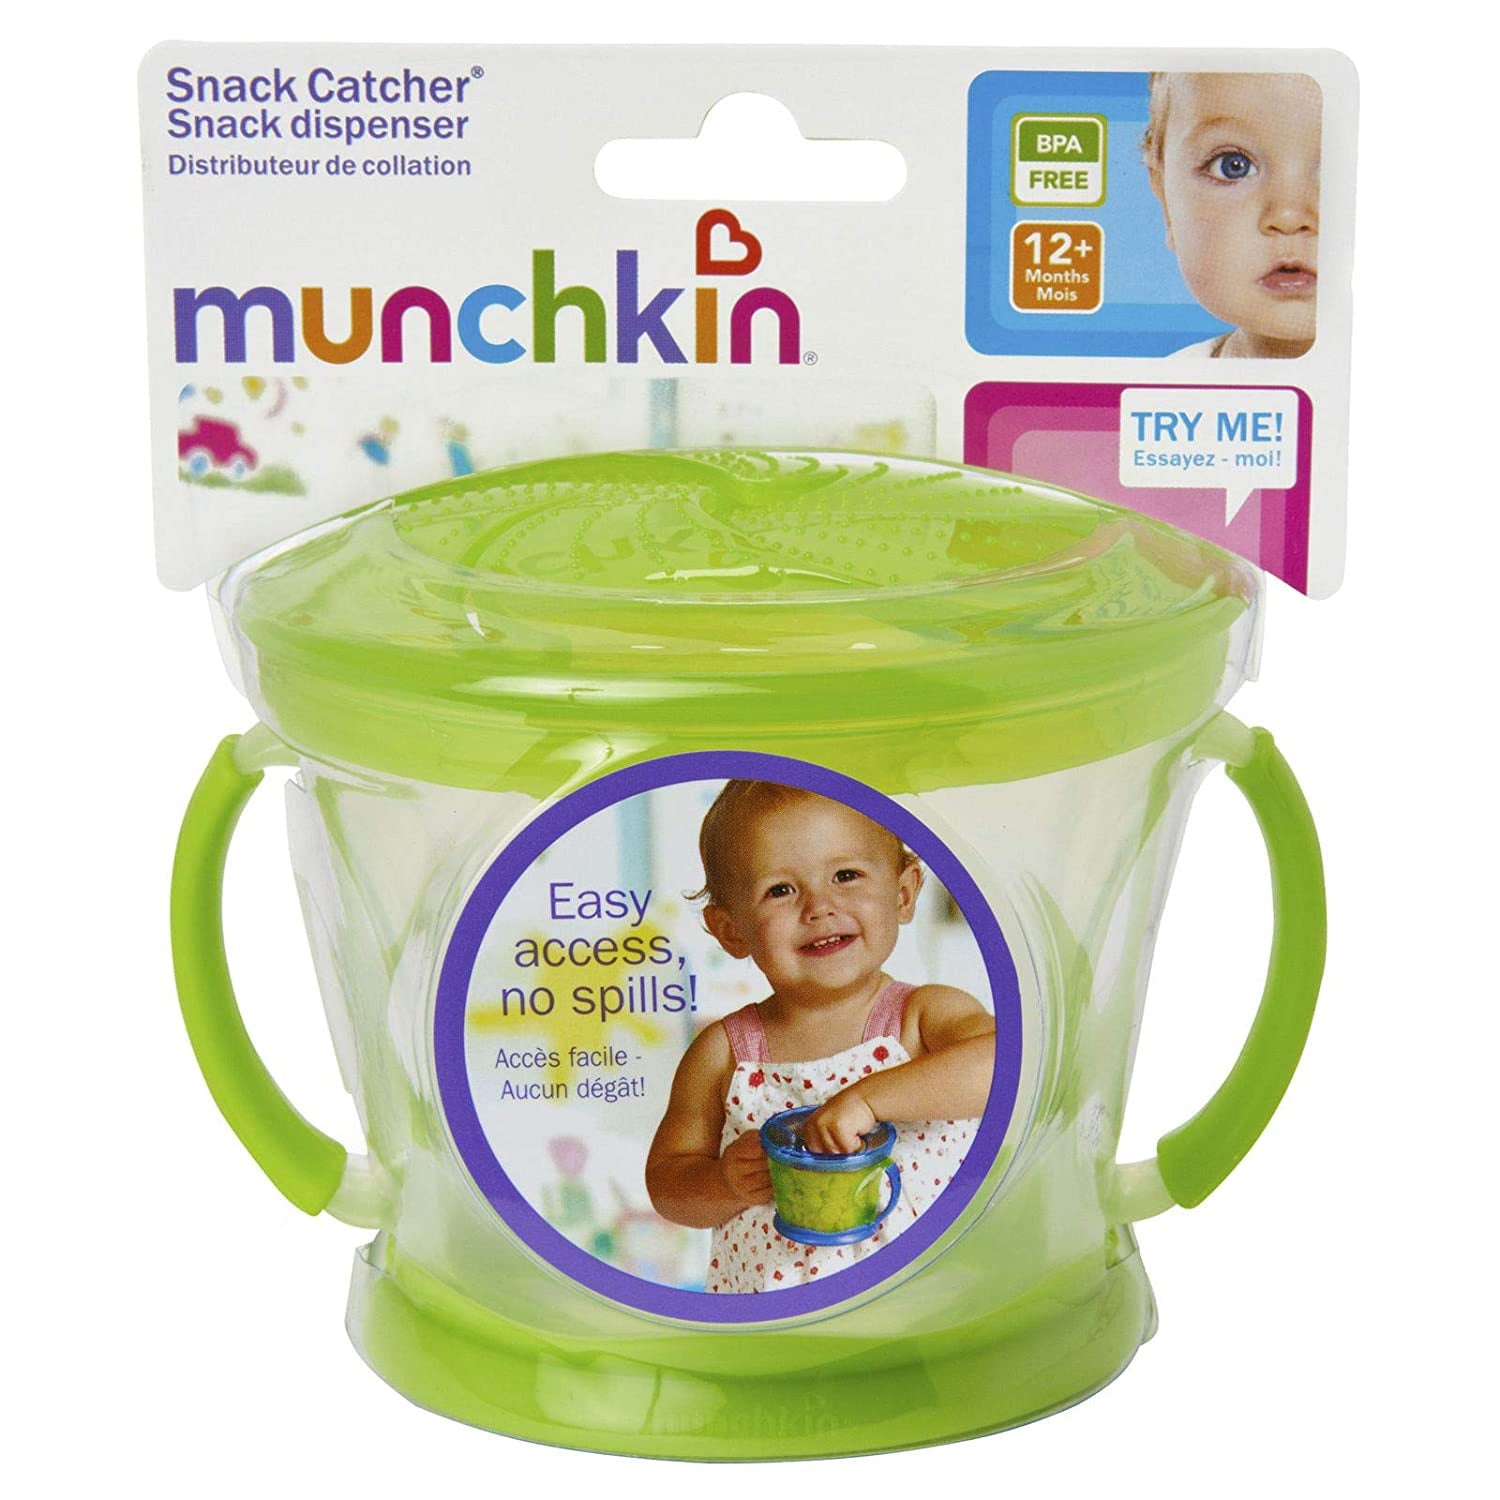 Munchkin Snack Catcher 9 Ounce 12+ Months color may vary